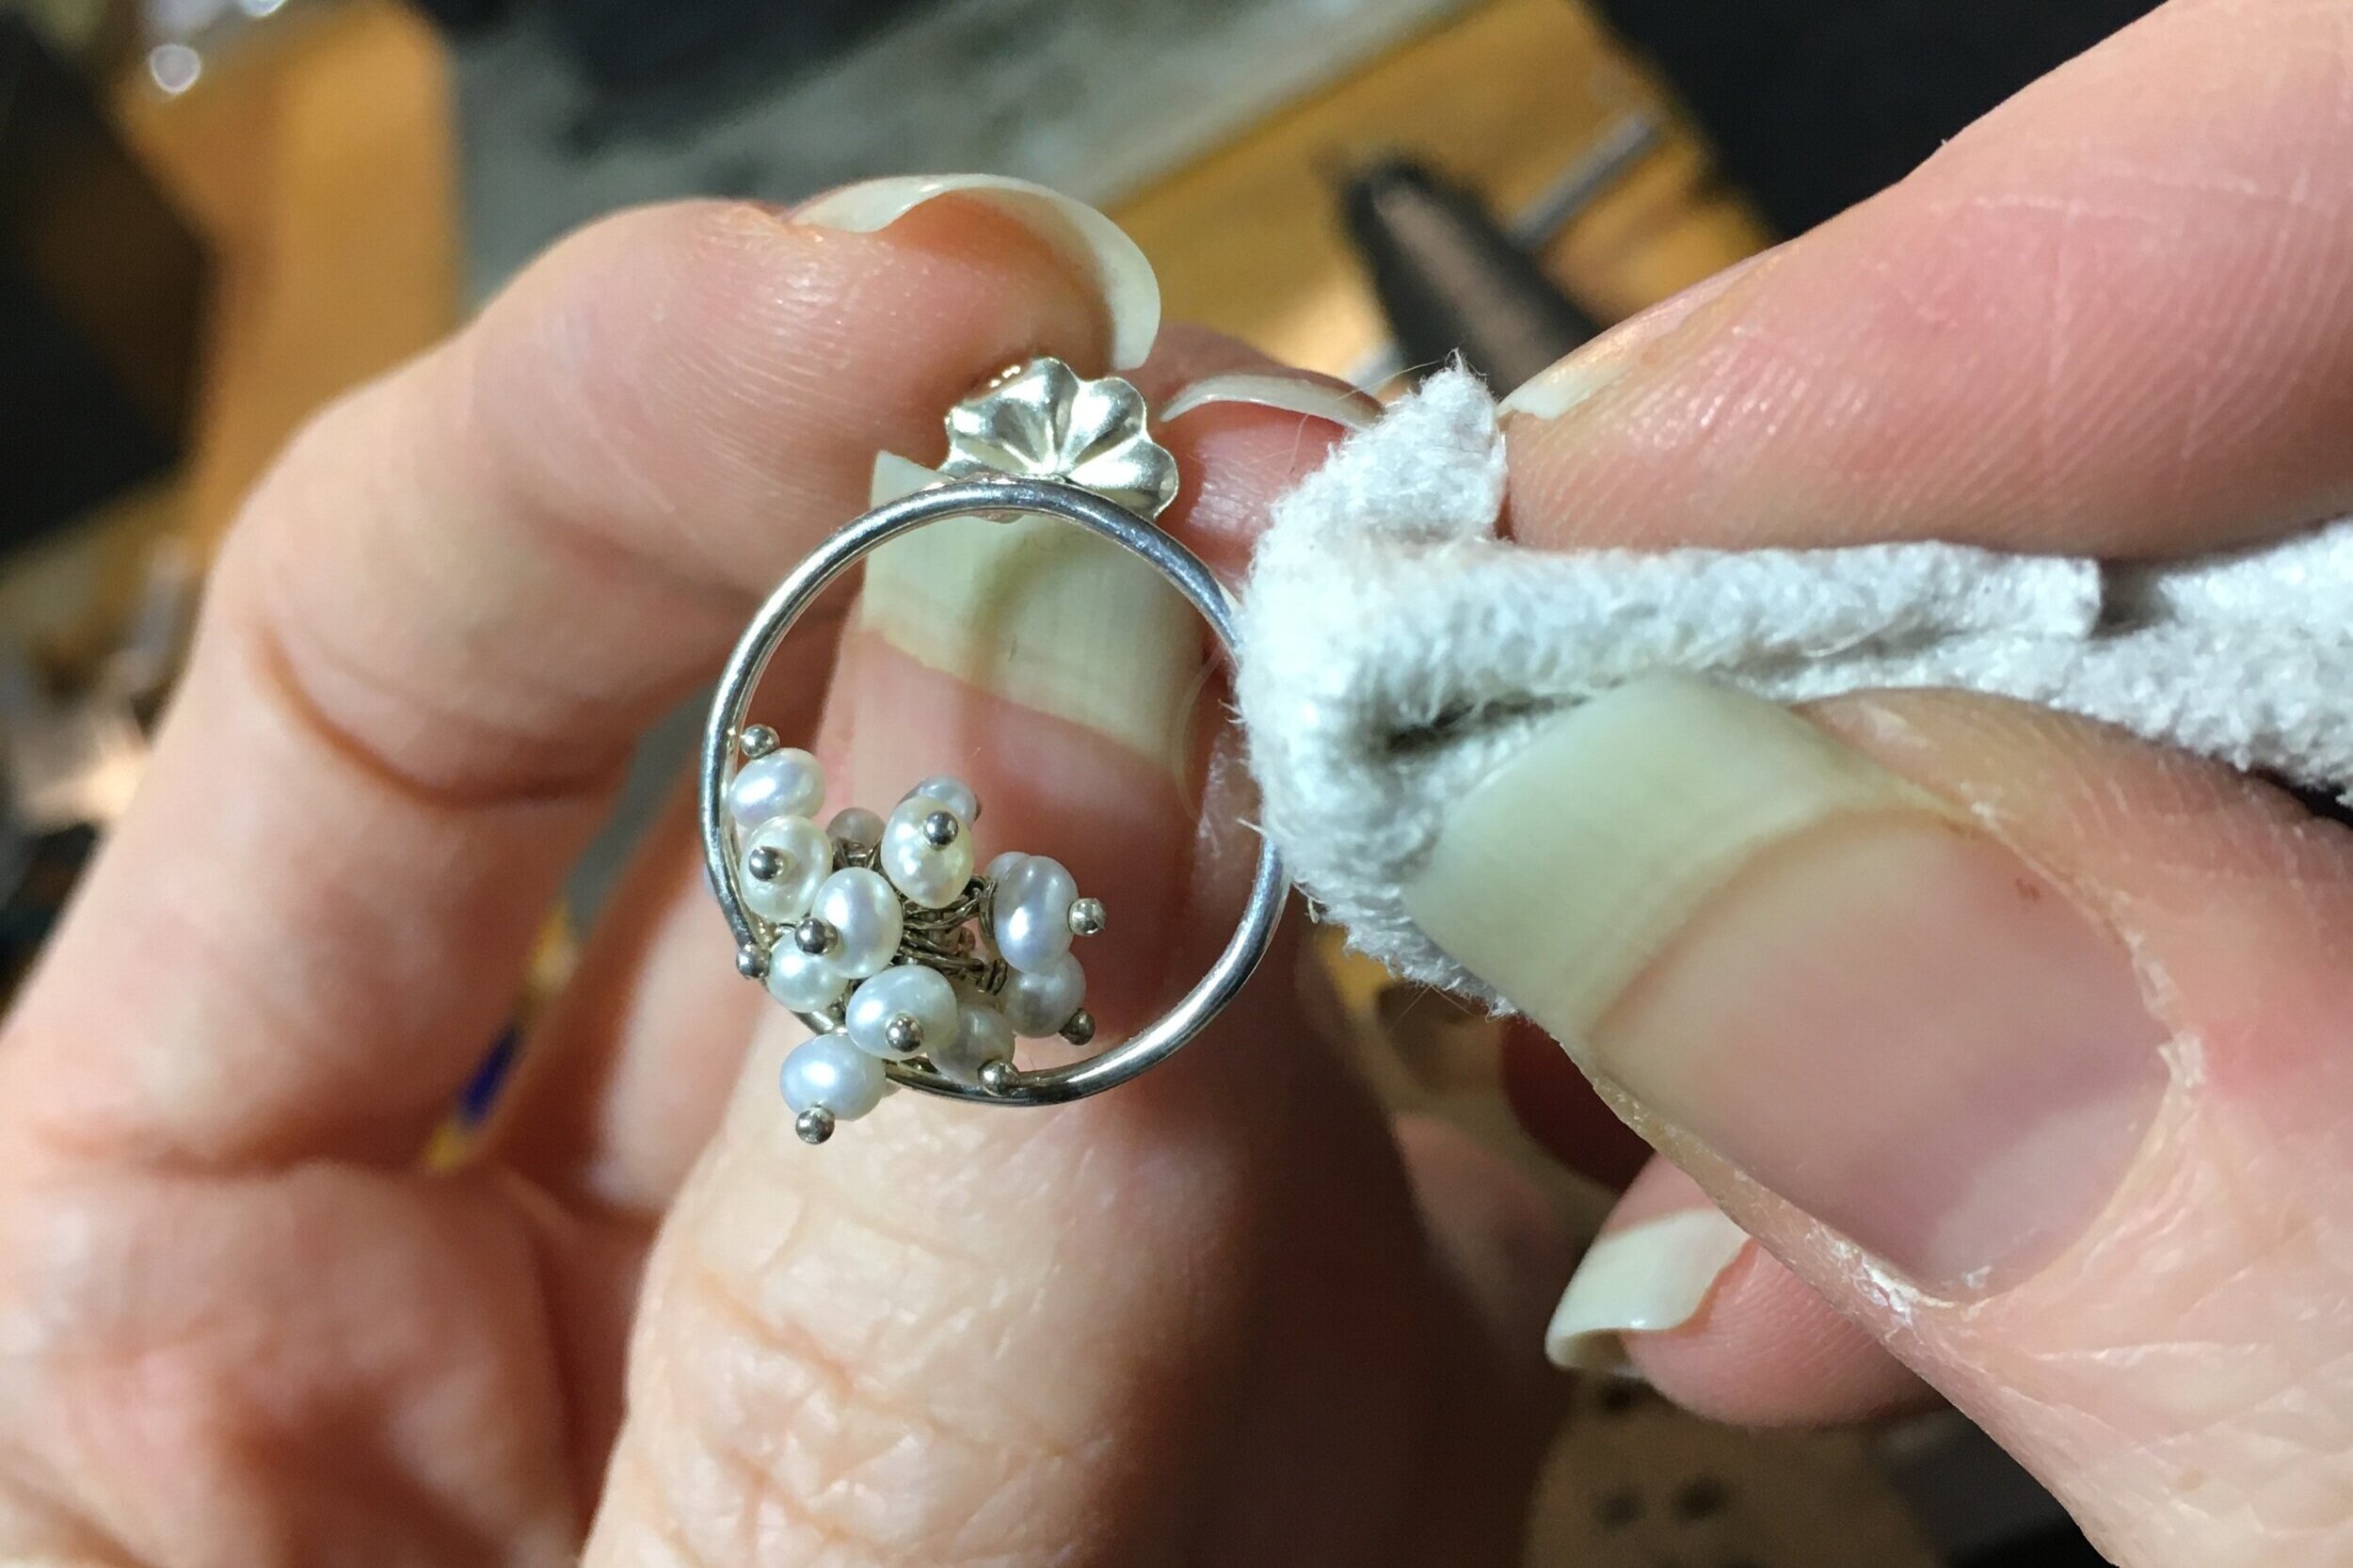 How-to for jewelry removal